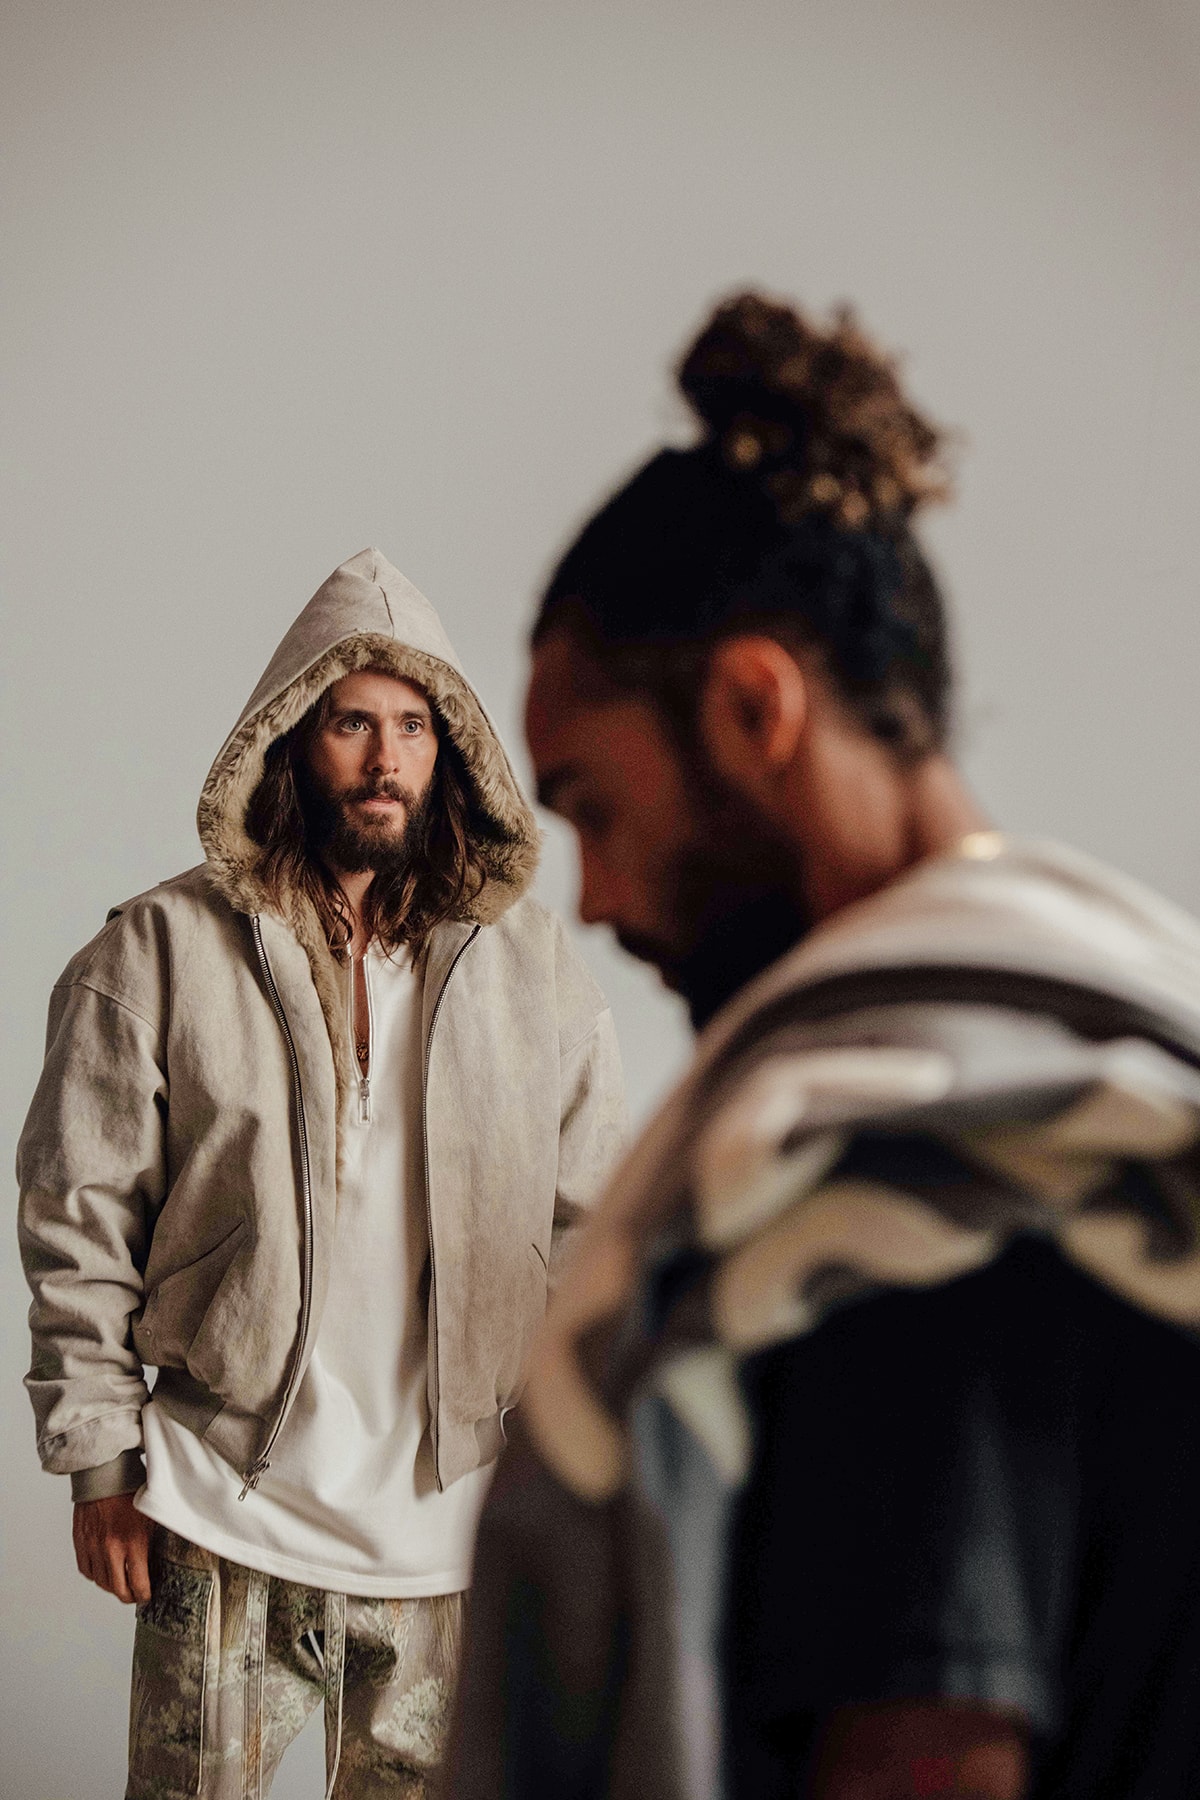 Fear of God sixth collection behind the scenes backstage making of exclusive photos pictures lookbook Jerry Lorenzo footwear jared leto drop release date